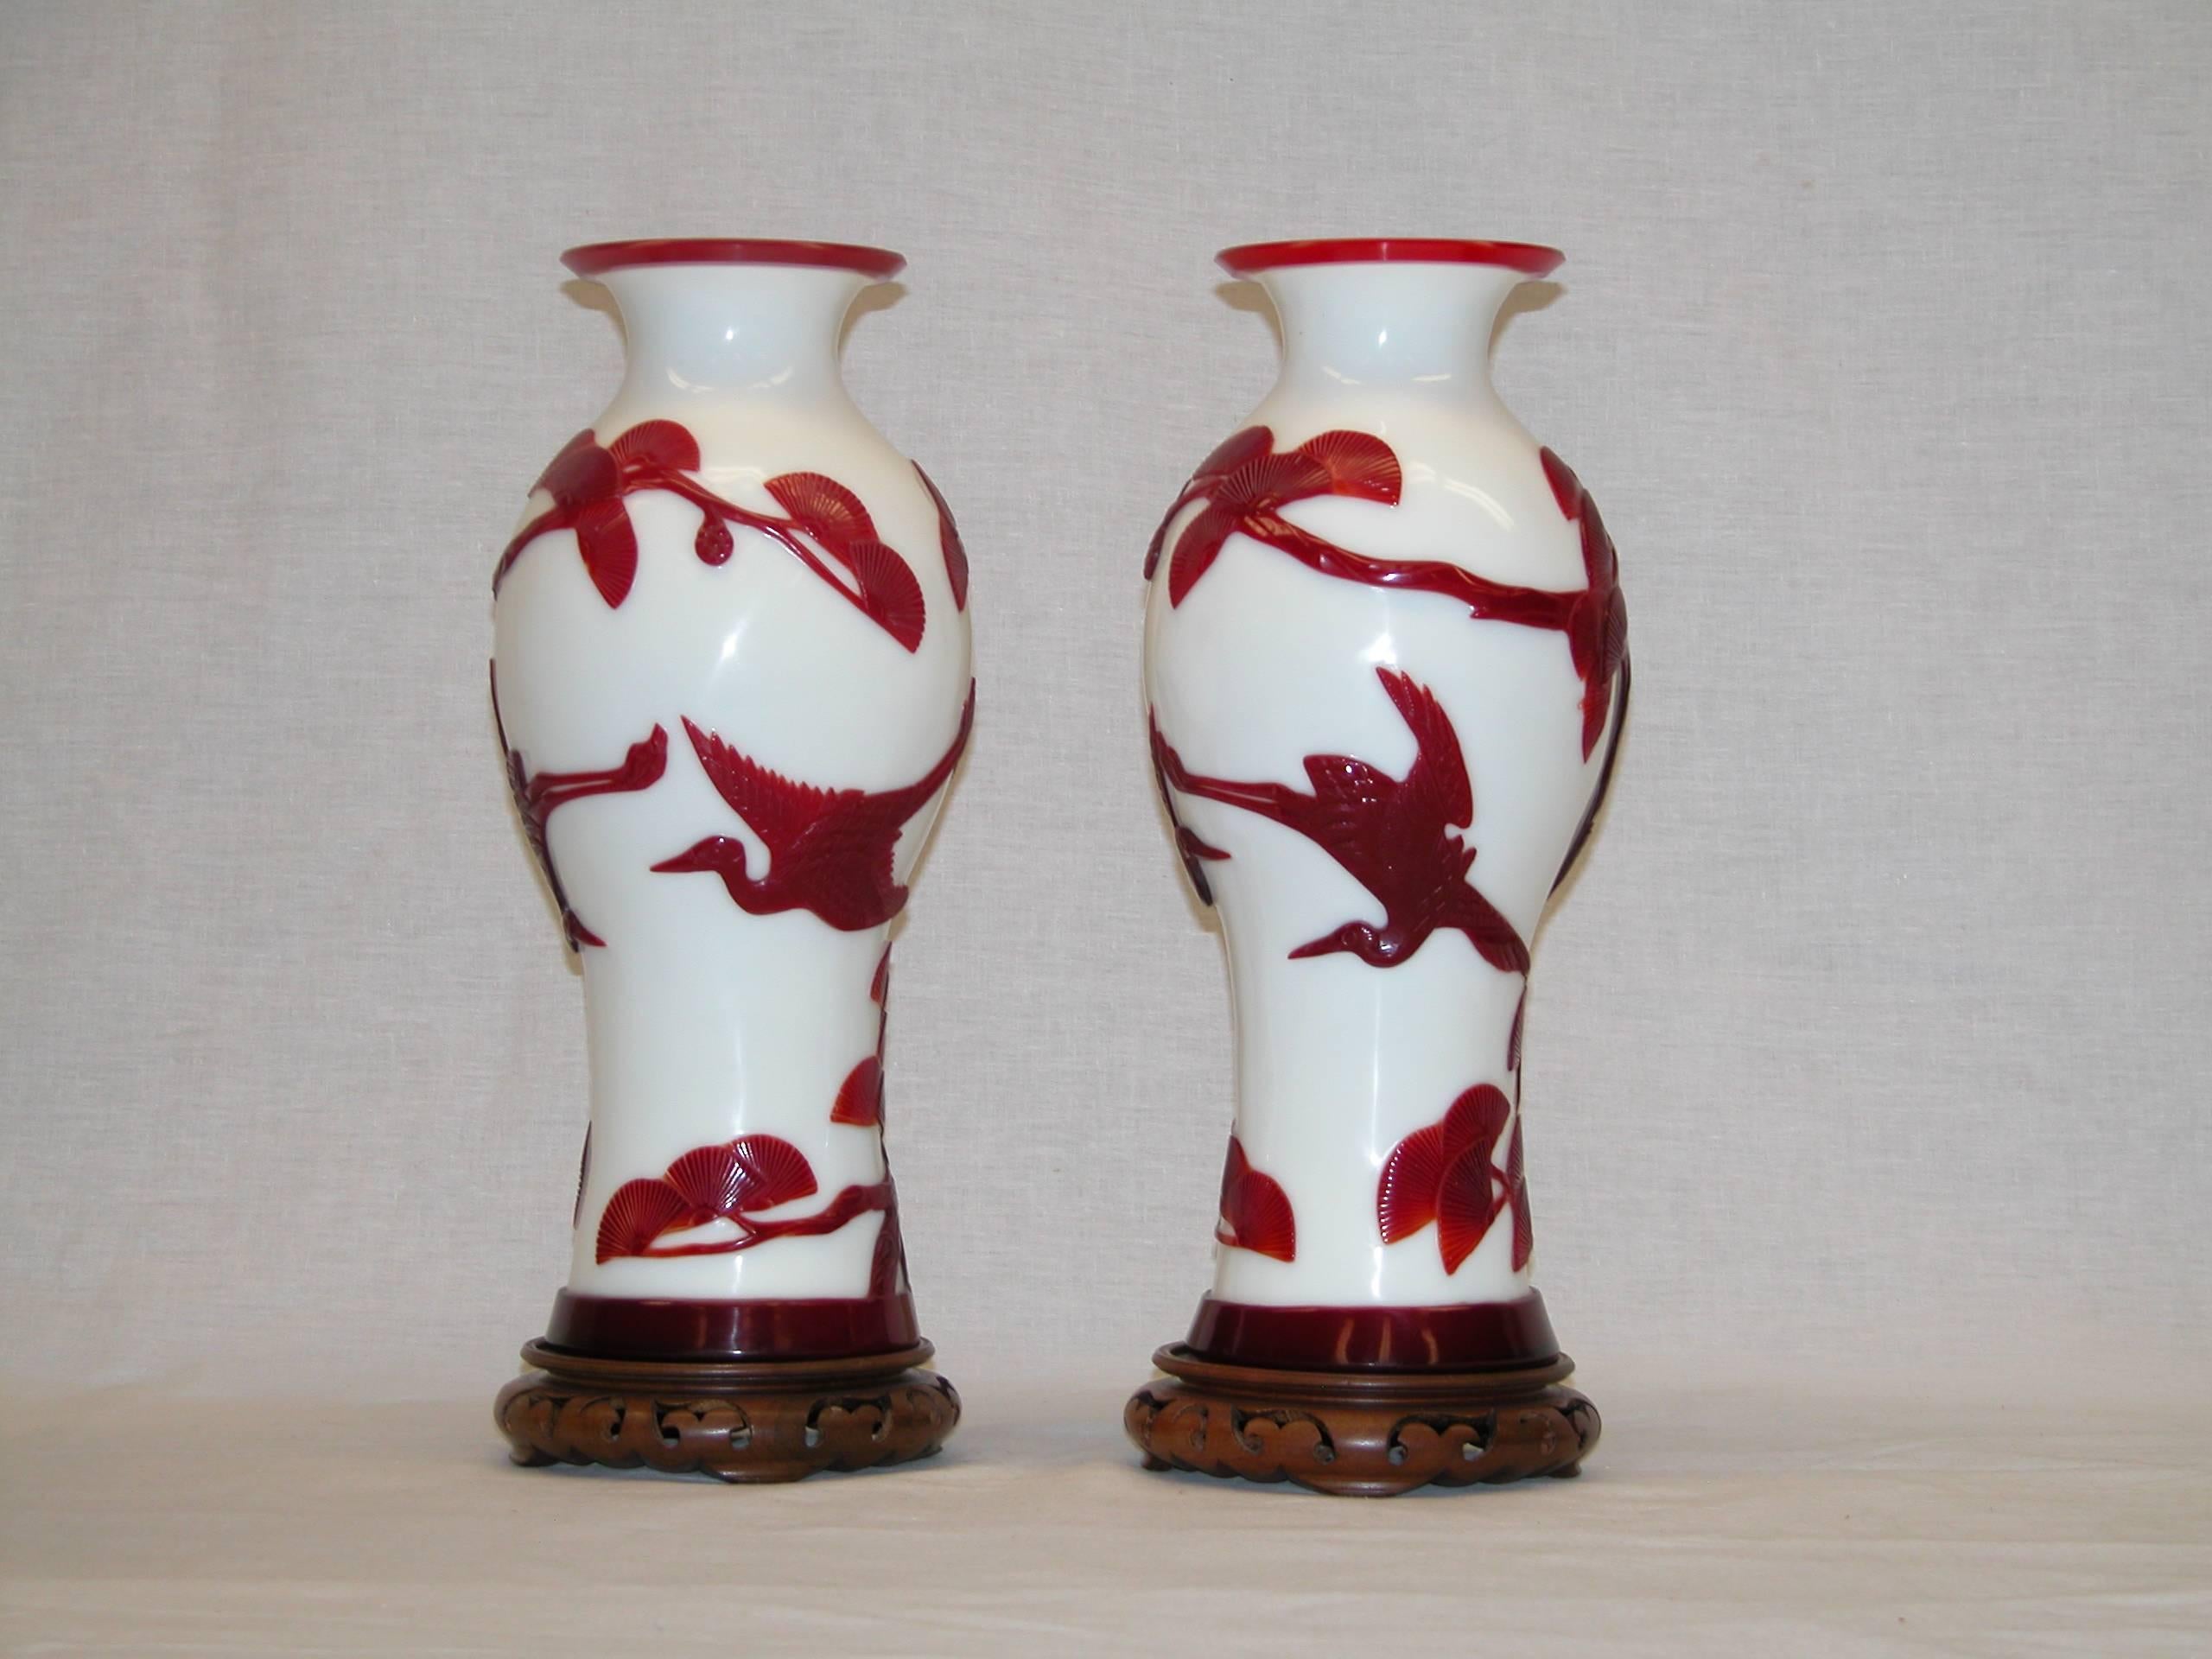 19th Century Pair of Peking Chinese Glass Urns in Red and White Colors with Birds in Flight For Sale